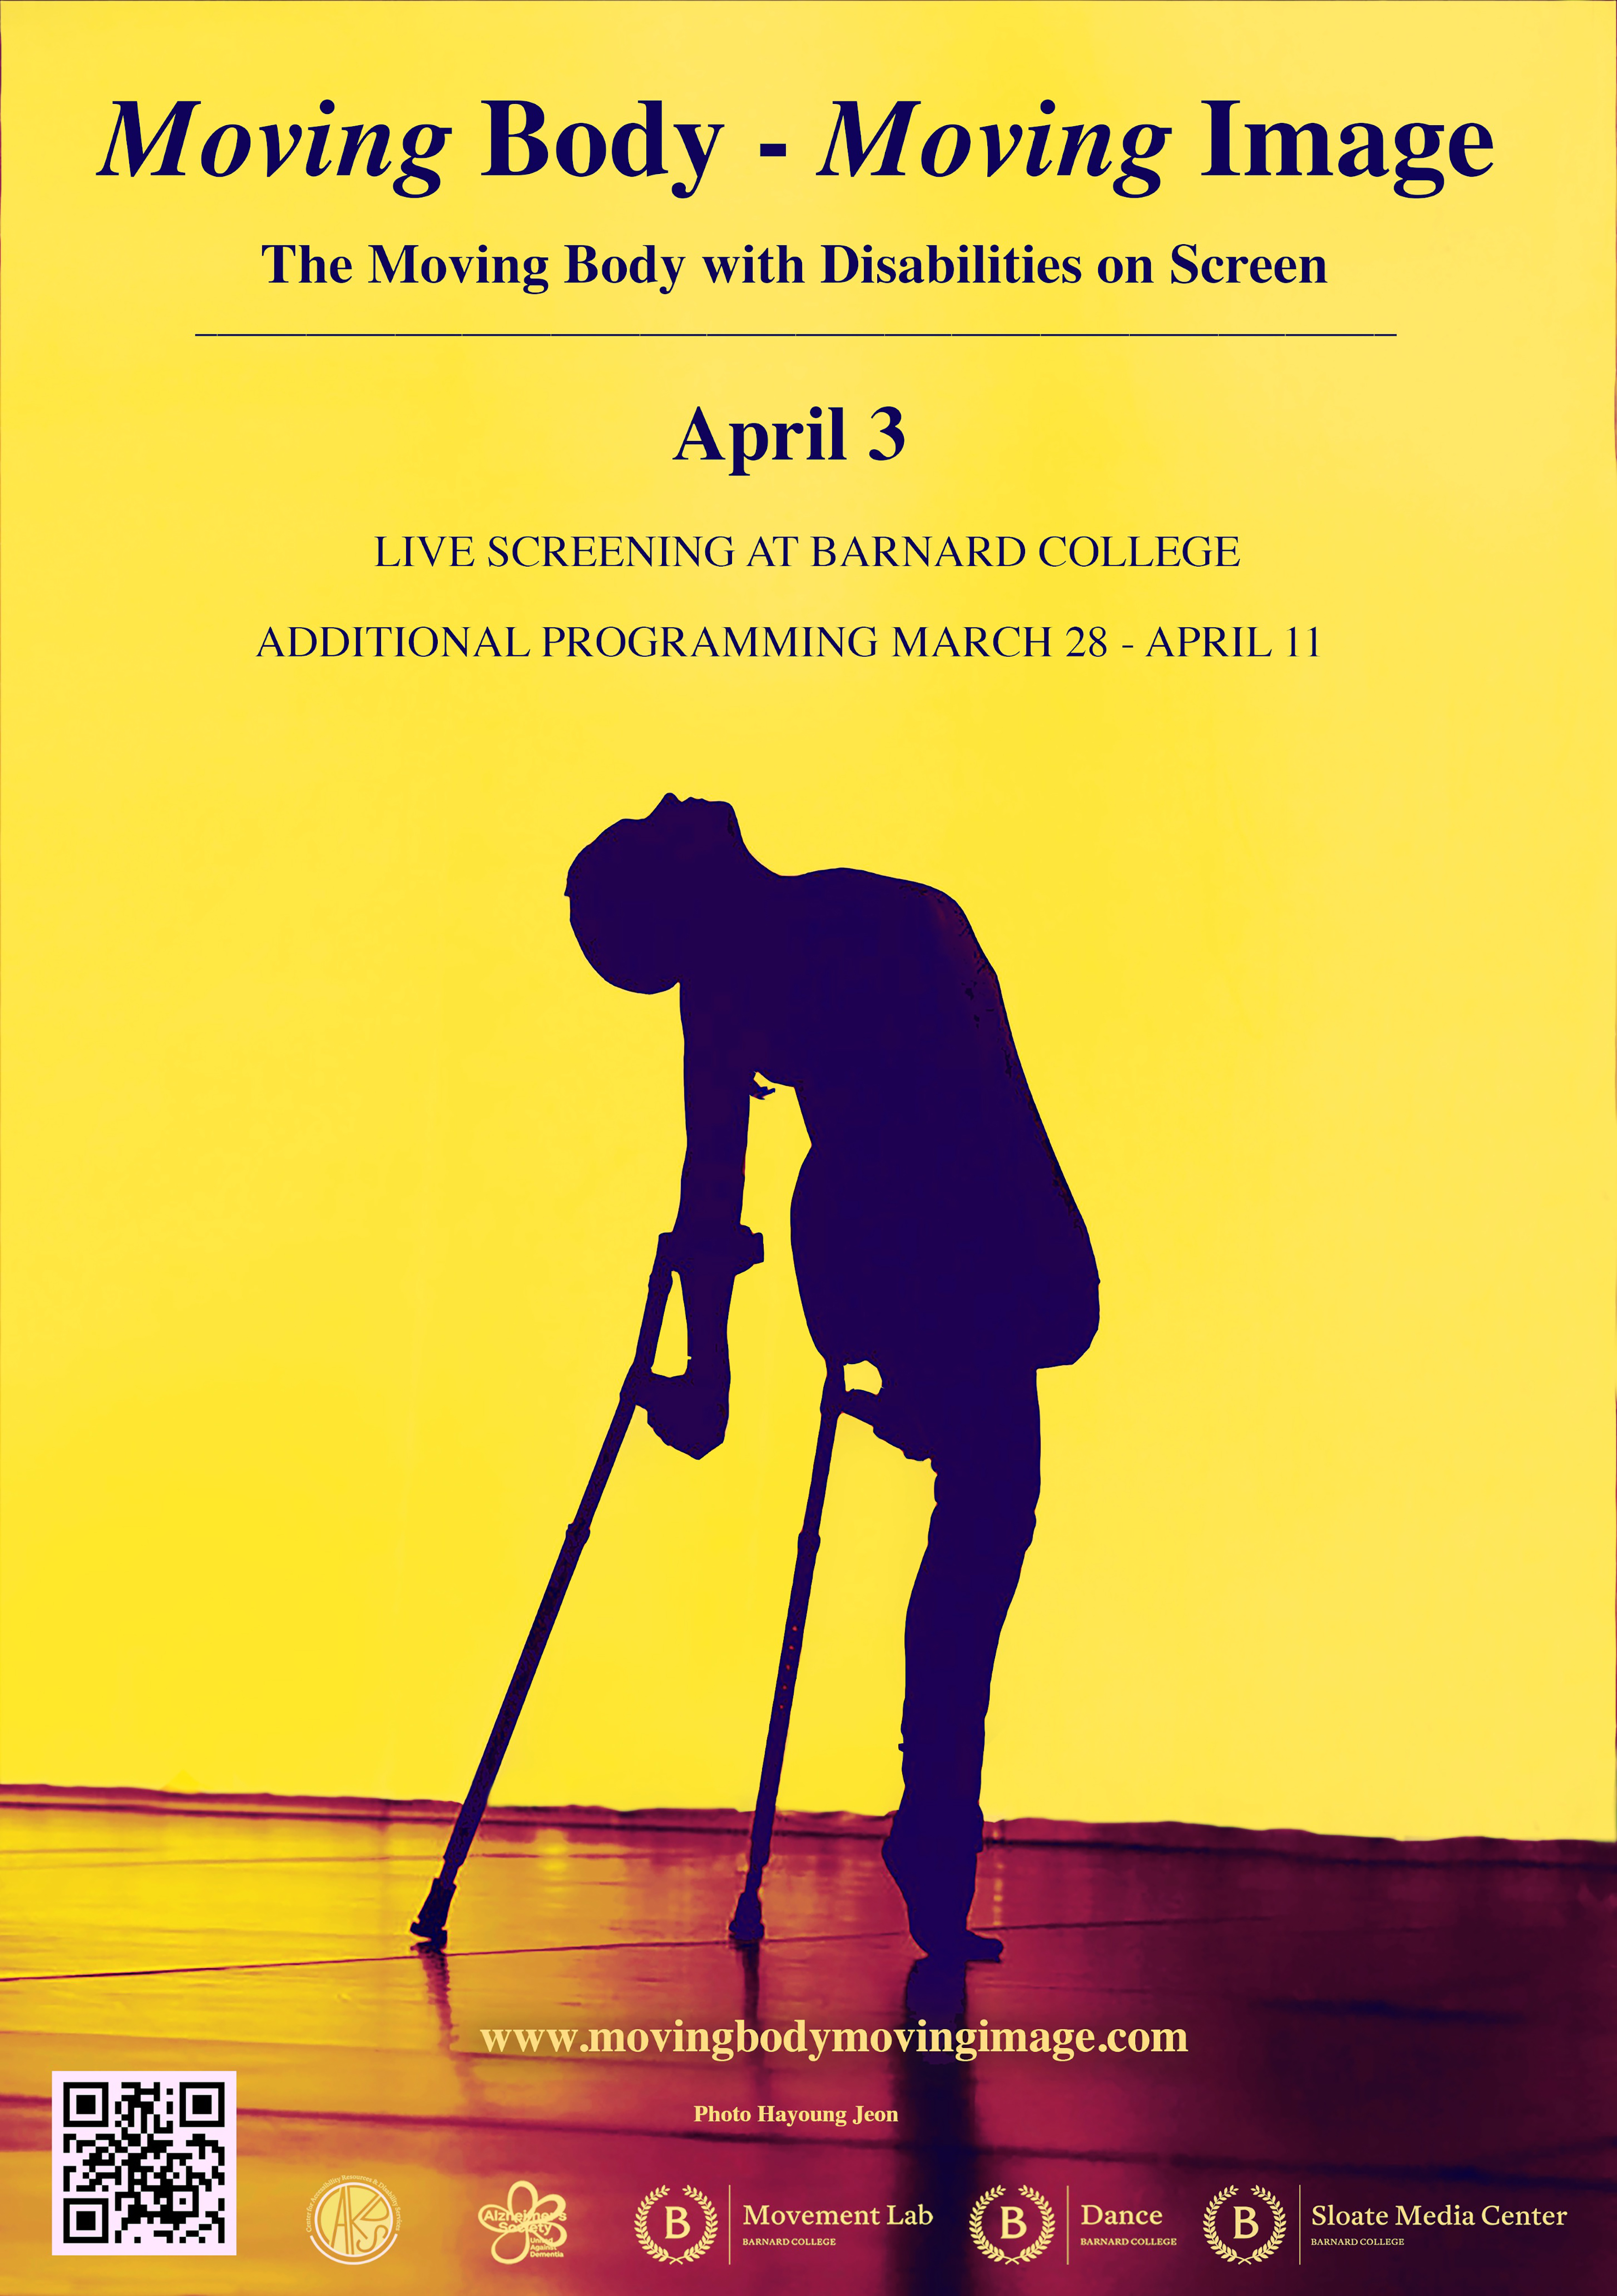 A poster promoting the Moving Body Moving Image 2022 Festival featuring a silhouette of a person on crutches against a yellow background